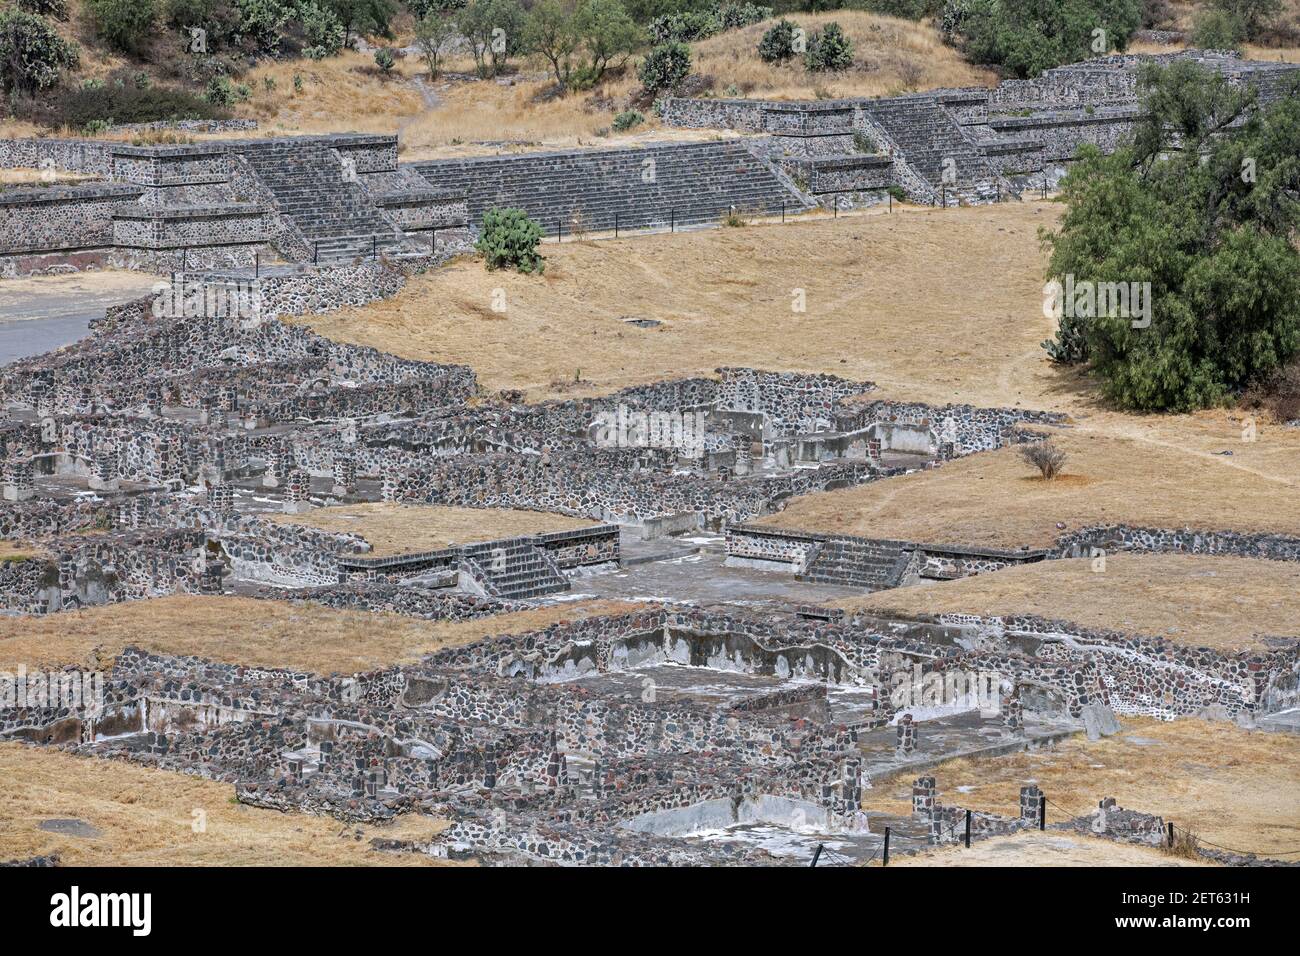 Ruins of the ancient city Teotihuacán, archeological site of Mesoamerican pyramids built in the pre-Columbian Americas in Mexico Stock Photo